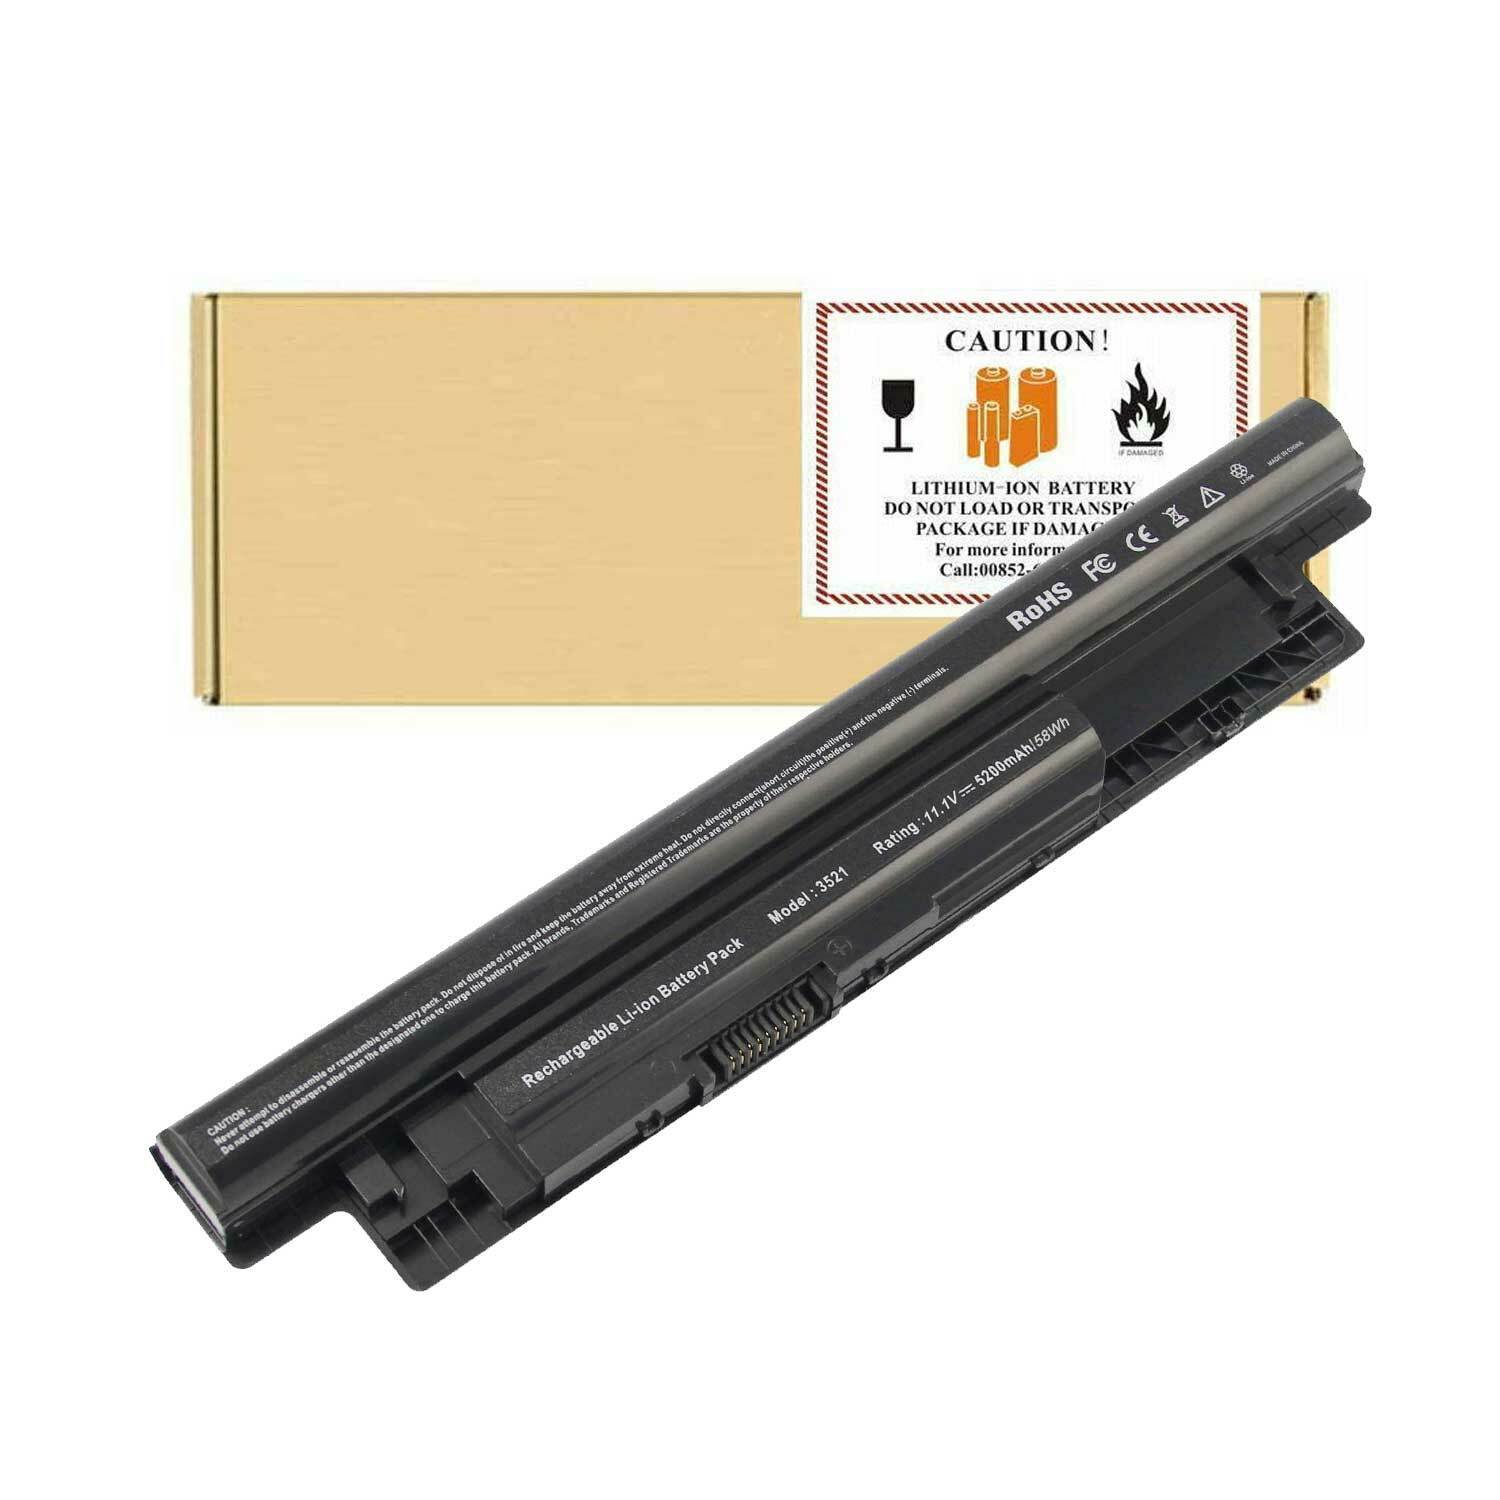 New Battery for Dell Inspiron M531R (5535), M731R (5735) Notebooks